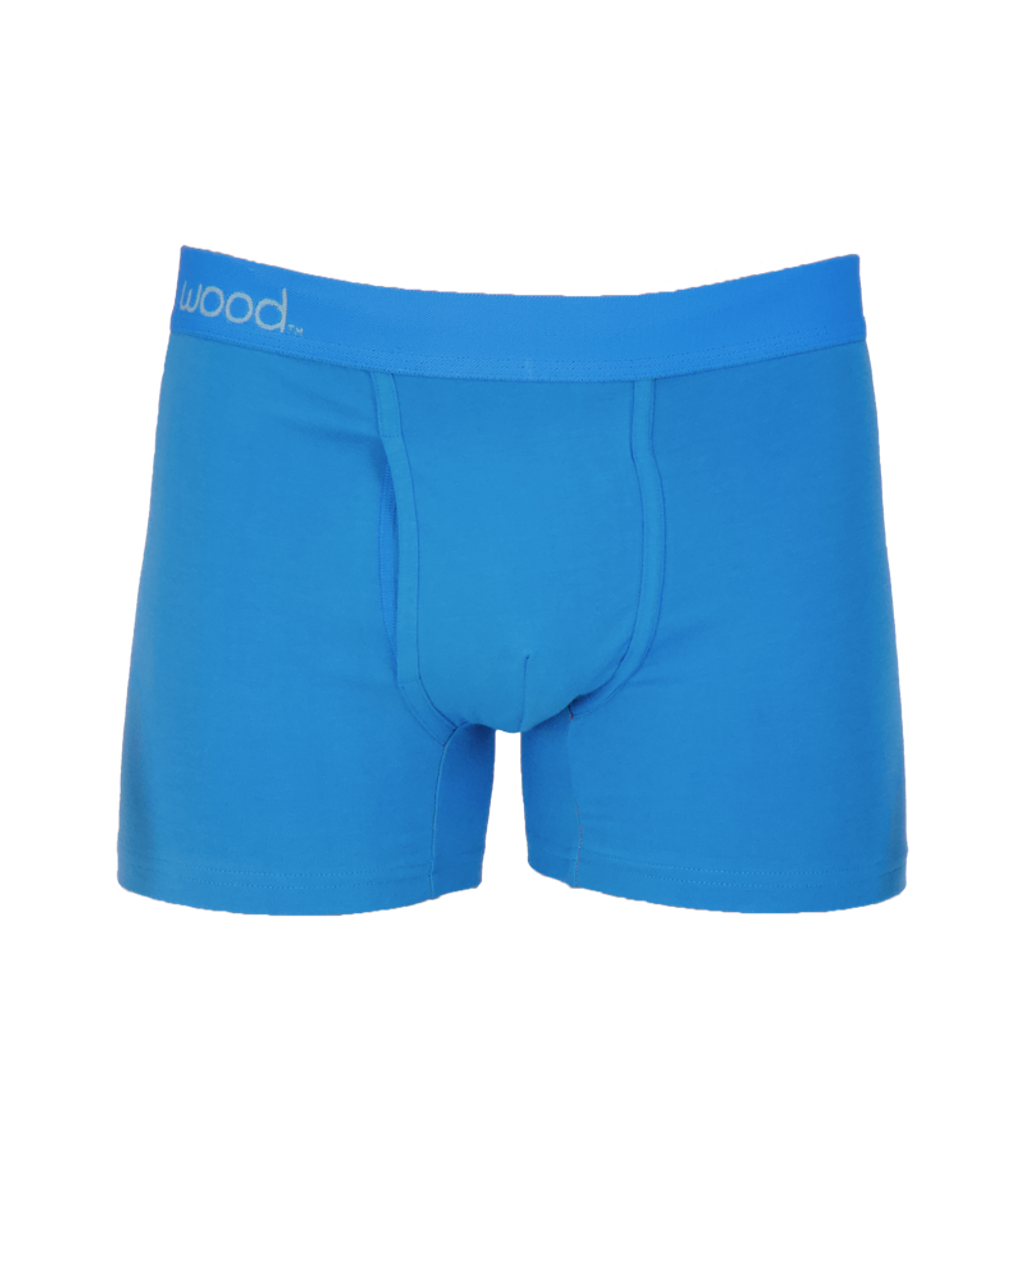 Wood Boxer Brief with Fly